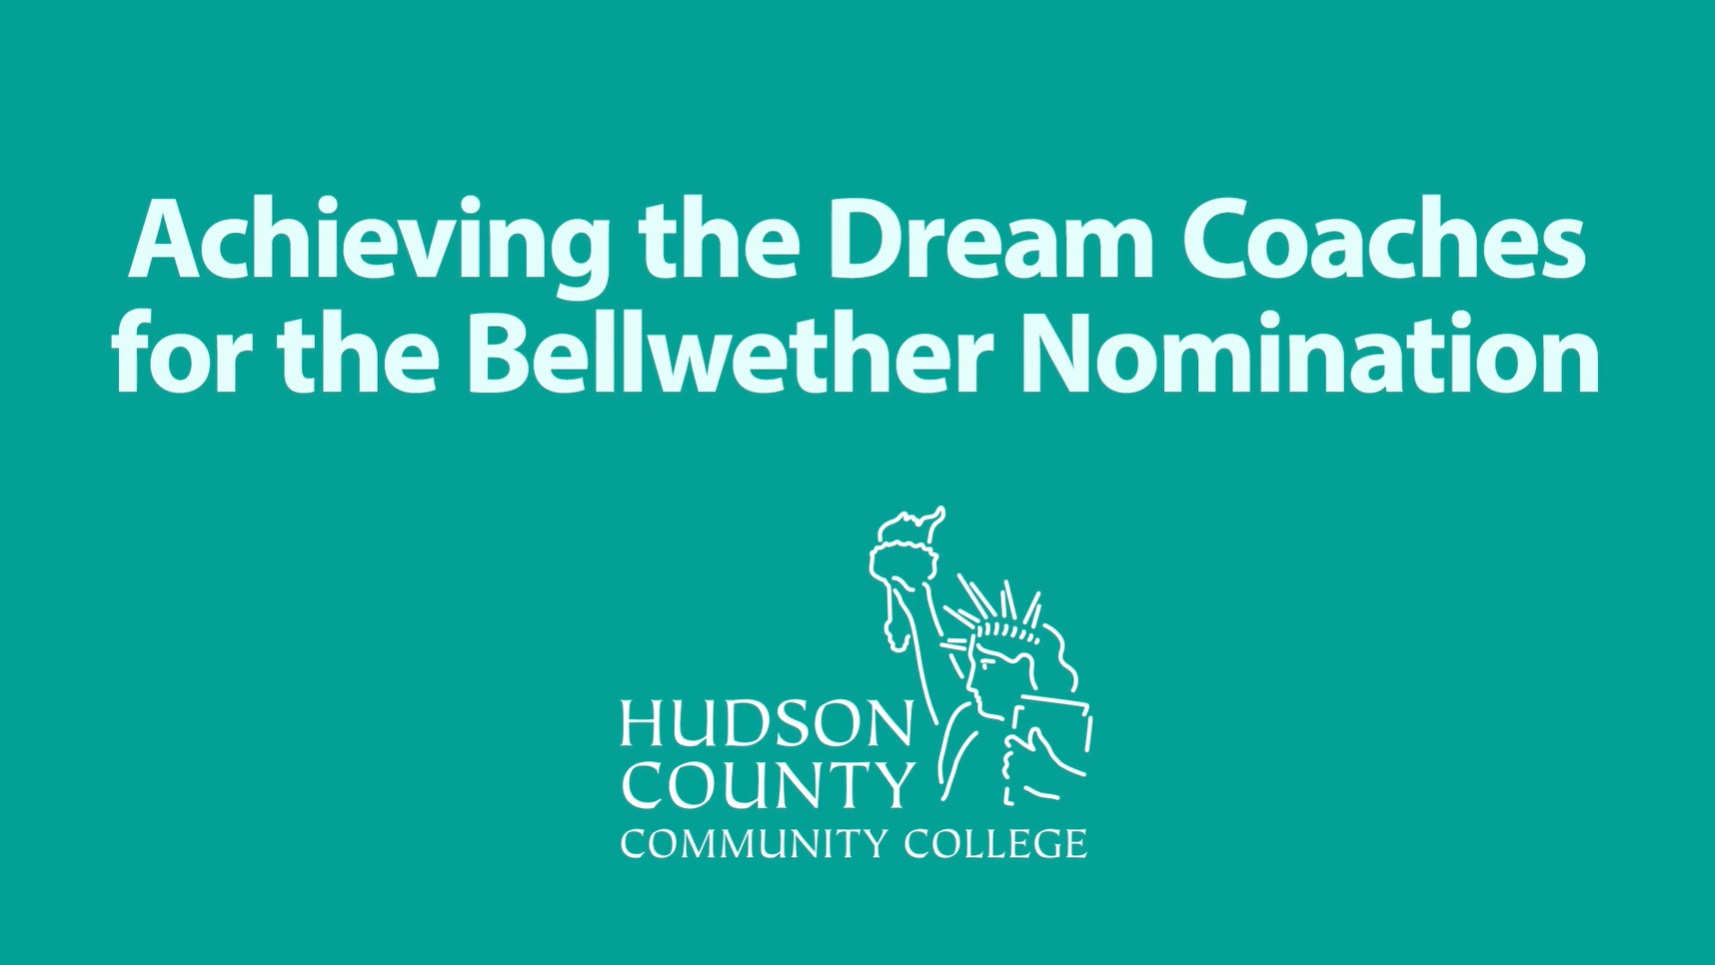 Achieving the Dream Coaches for the Bellwether Nomination